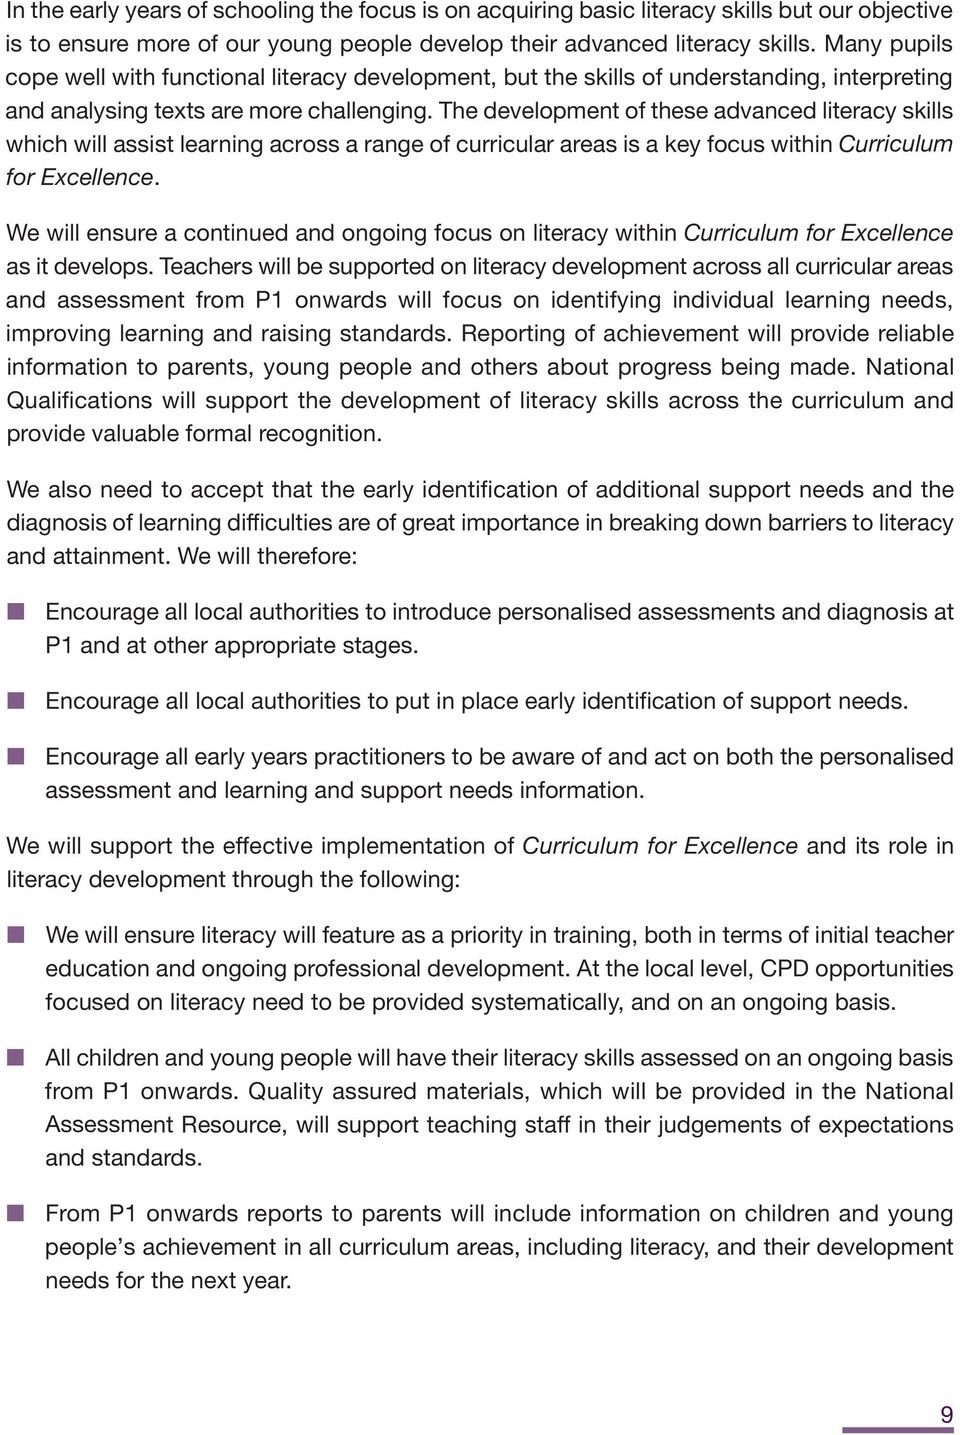 The development of these advanced literacy skills which will assist learning across a range of curricular areas is a key focus within Curriculum for Excellence.